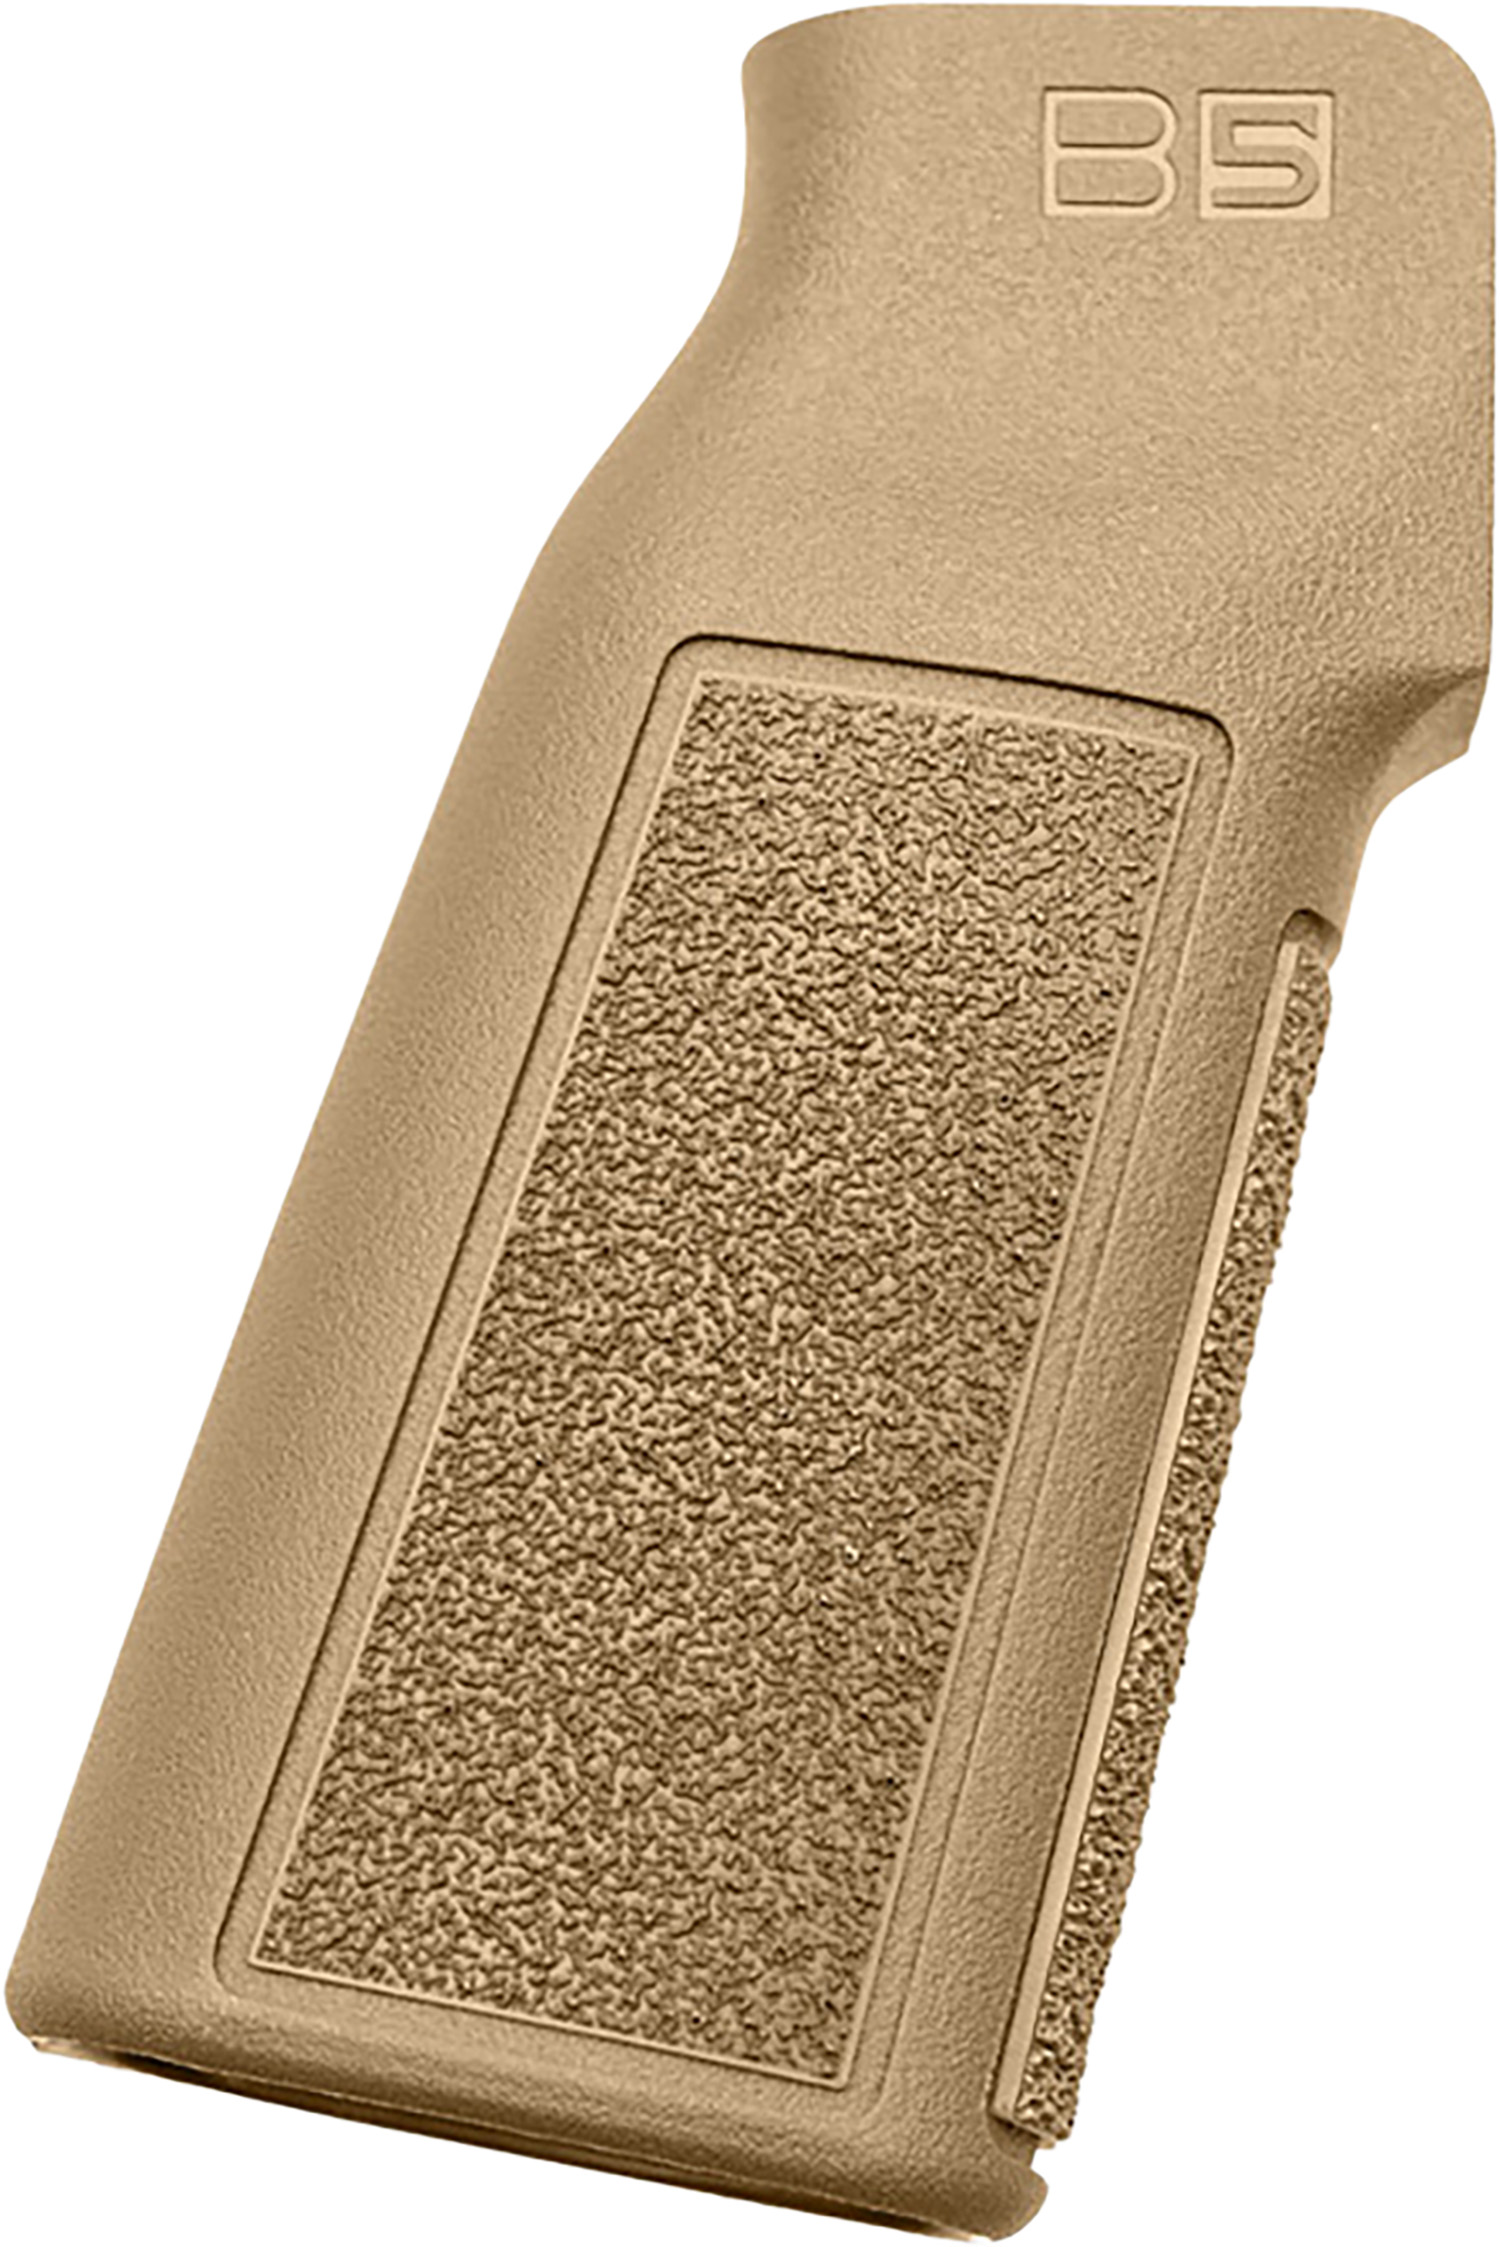 B5 Systems PGR1453 Type 22 P-Grip  FDE Aggressive Textured Polymer, Increased Vertical Grip Angle with No Backstrap, Fits AR-Platform